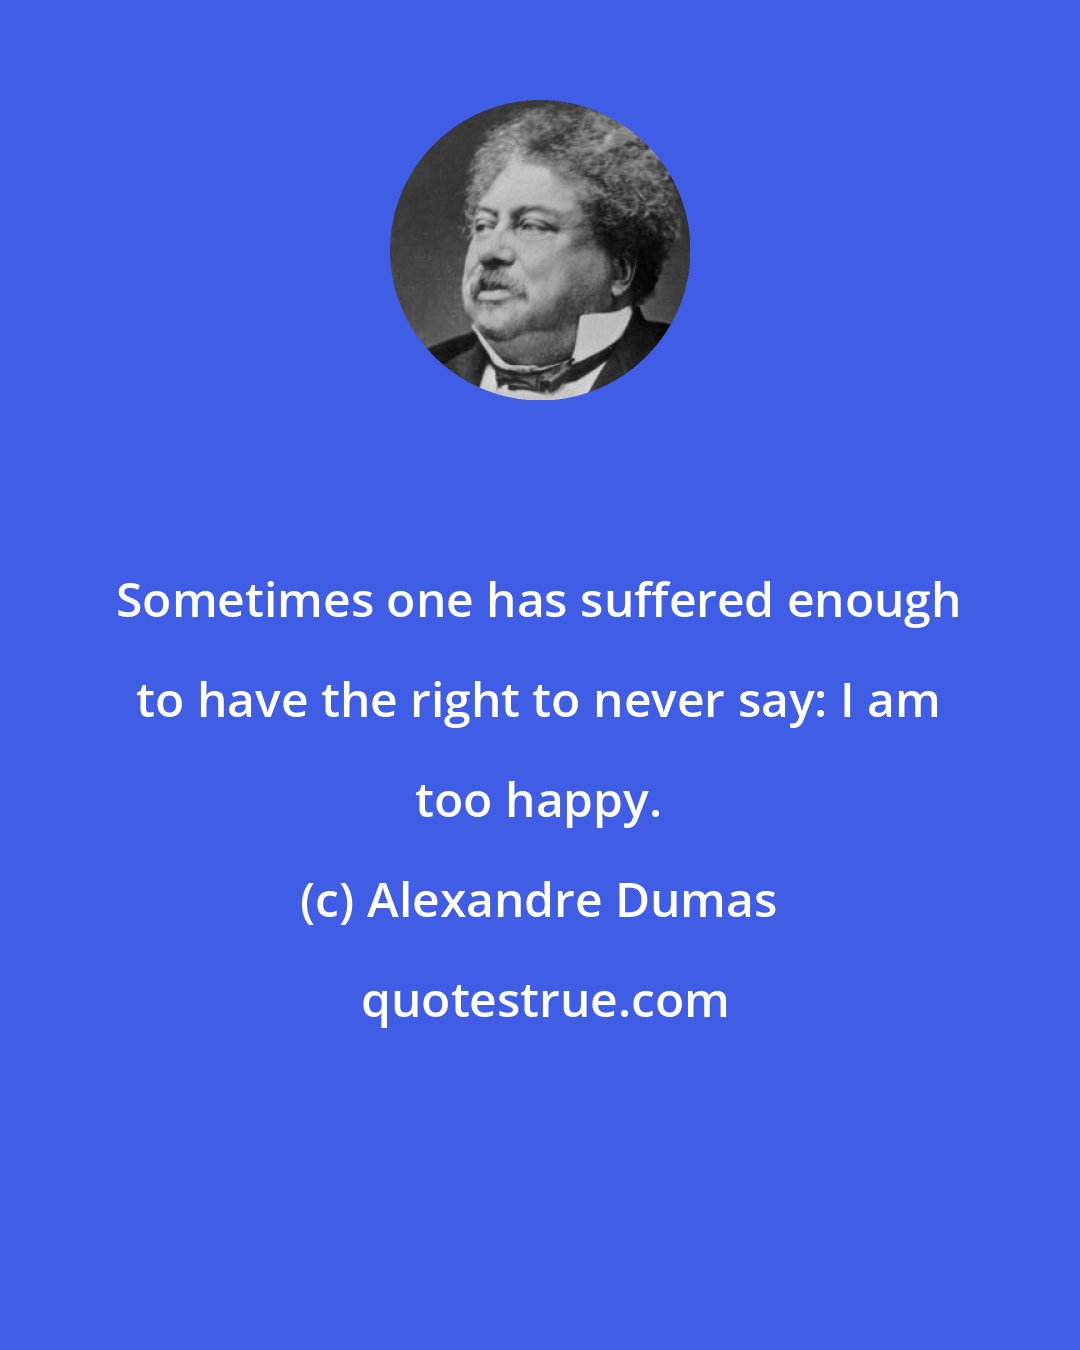 Alexandre Dumas: Sometimes one has suffered enough to have the right to never say: I am too happy.